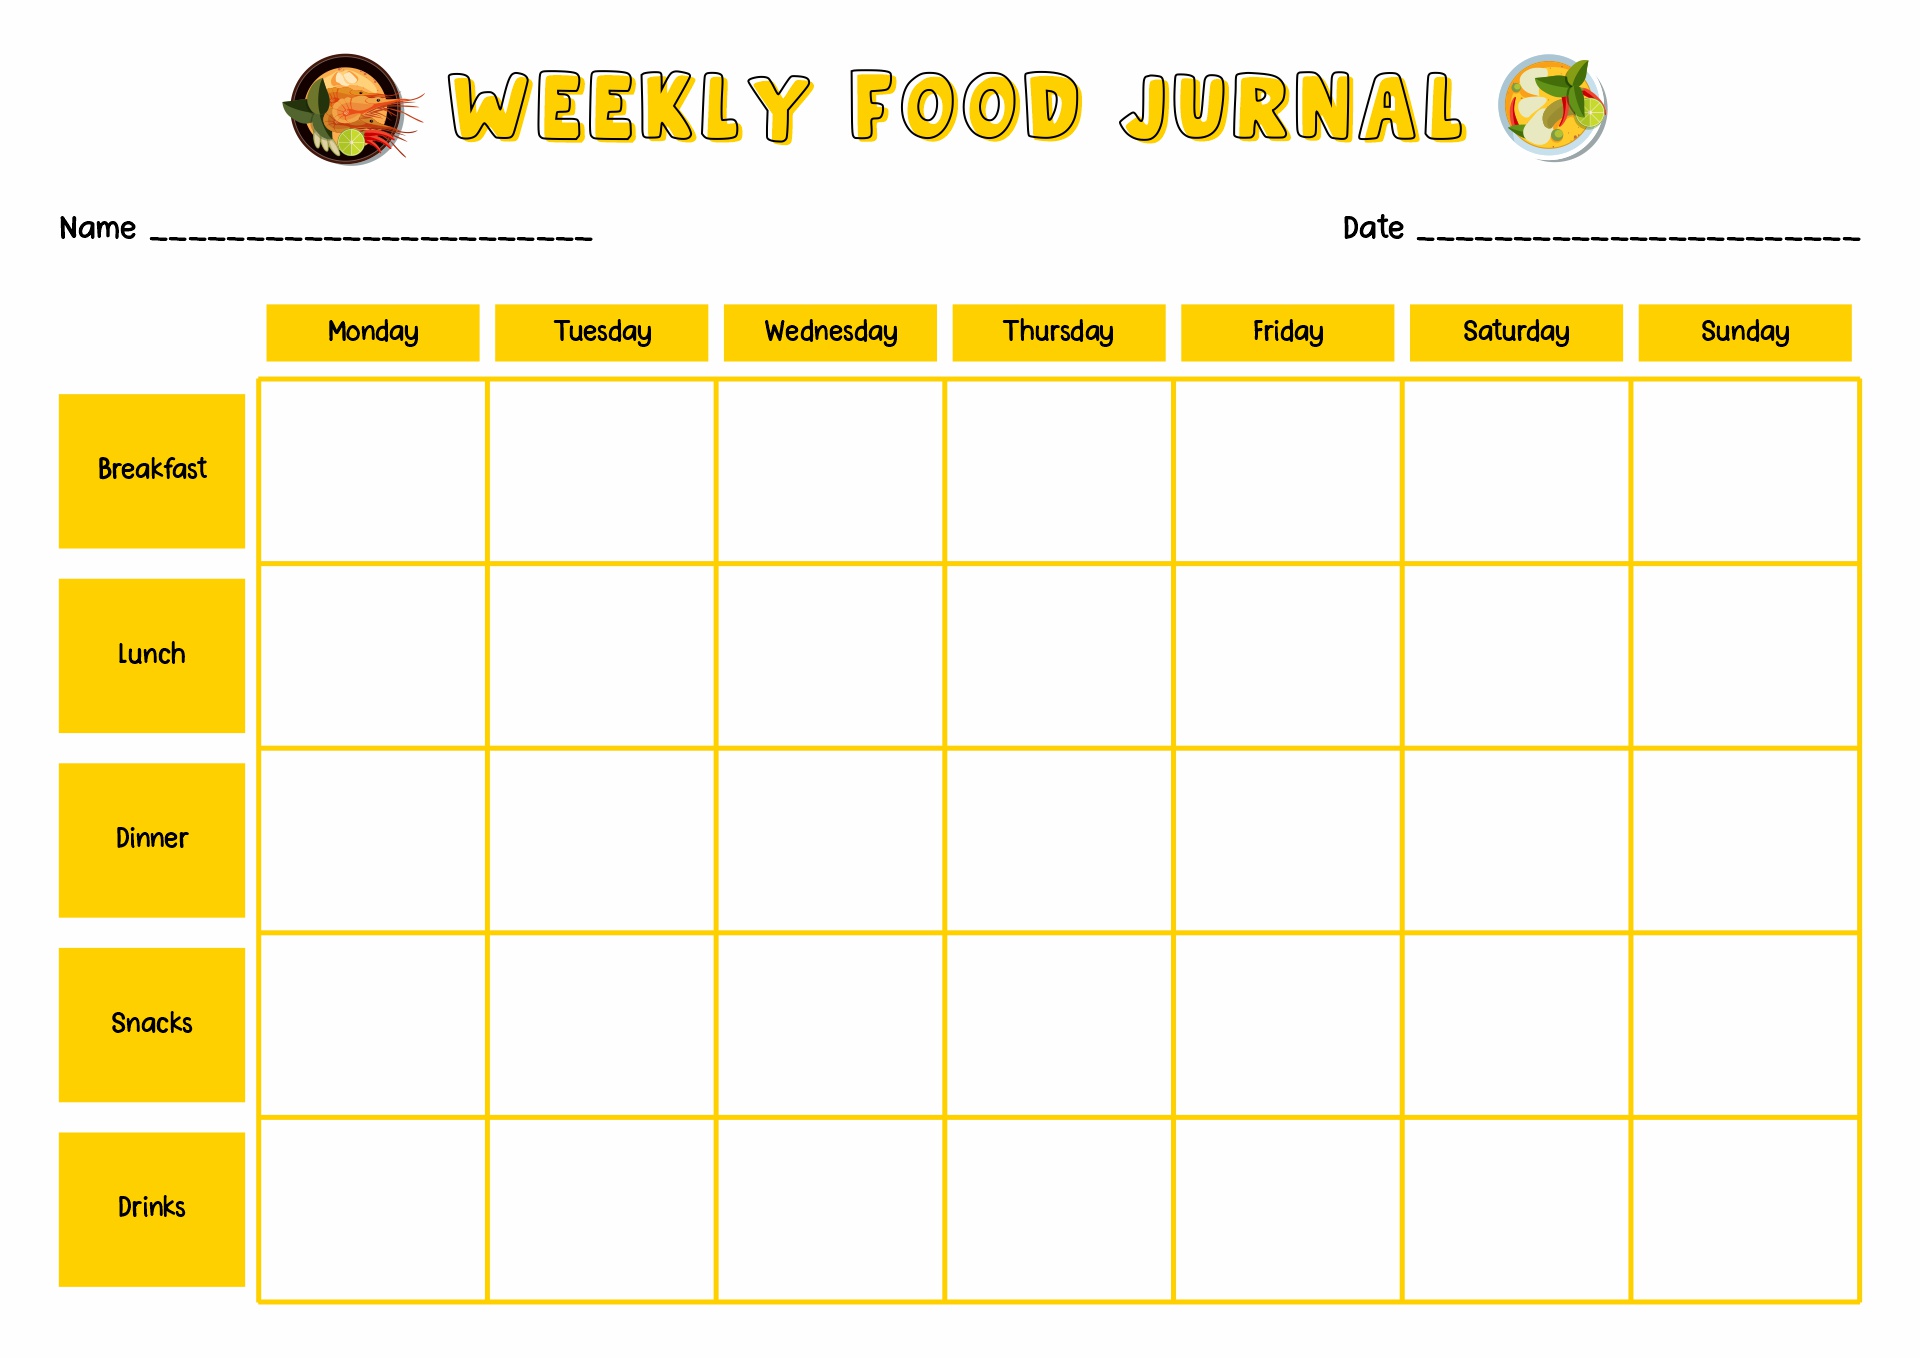 Journal Food Diary Template Image